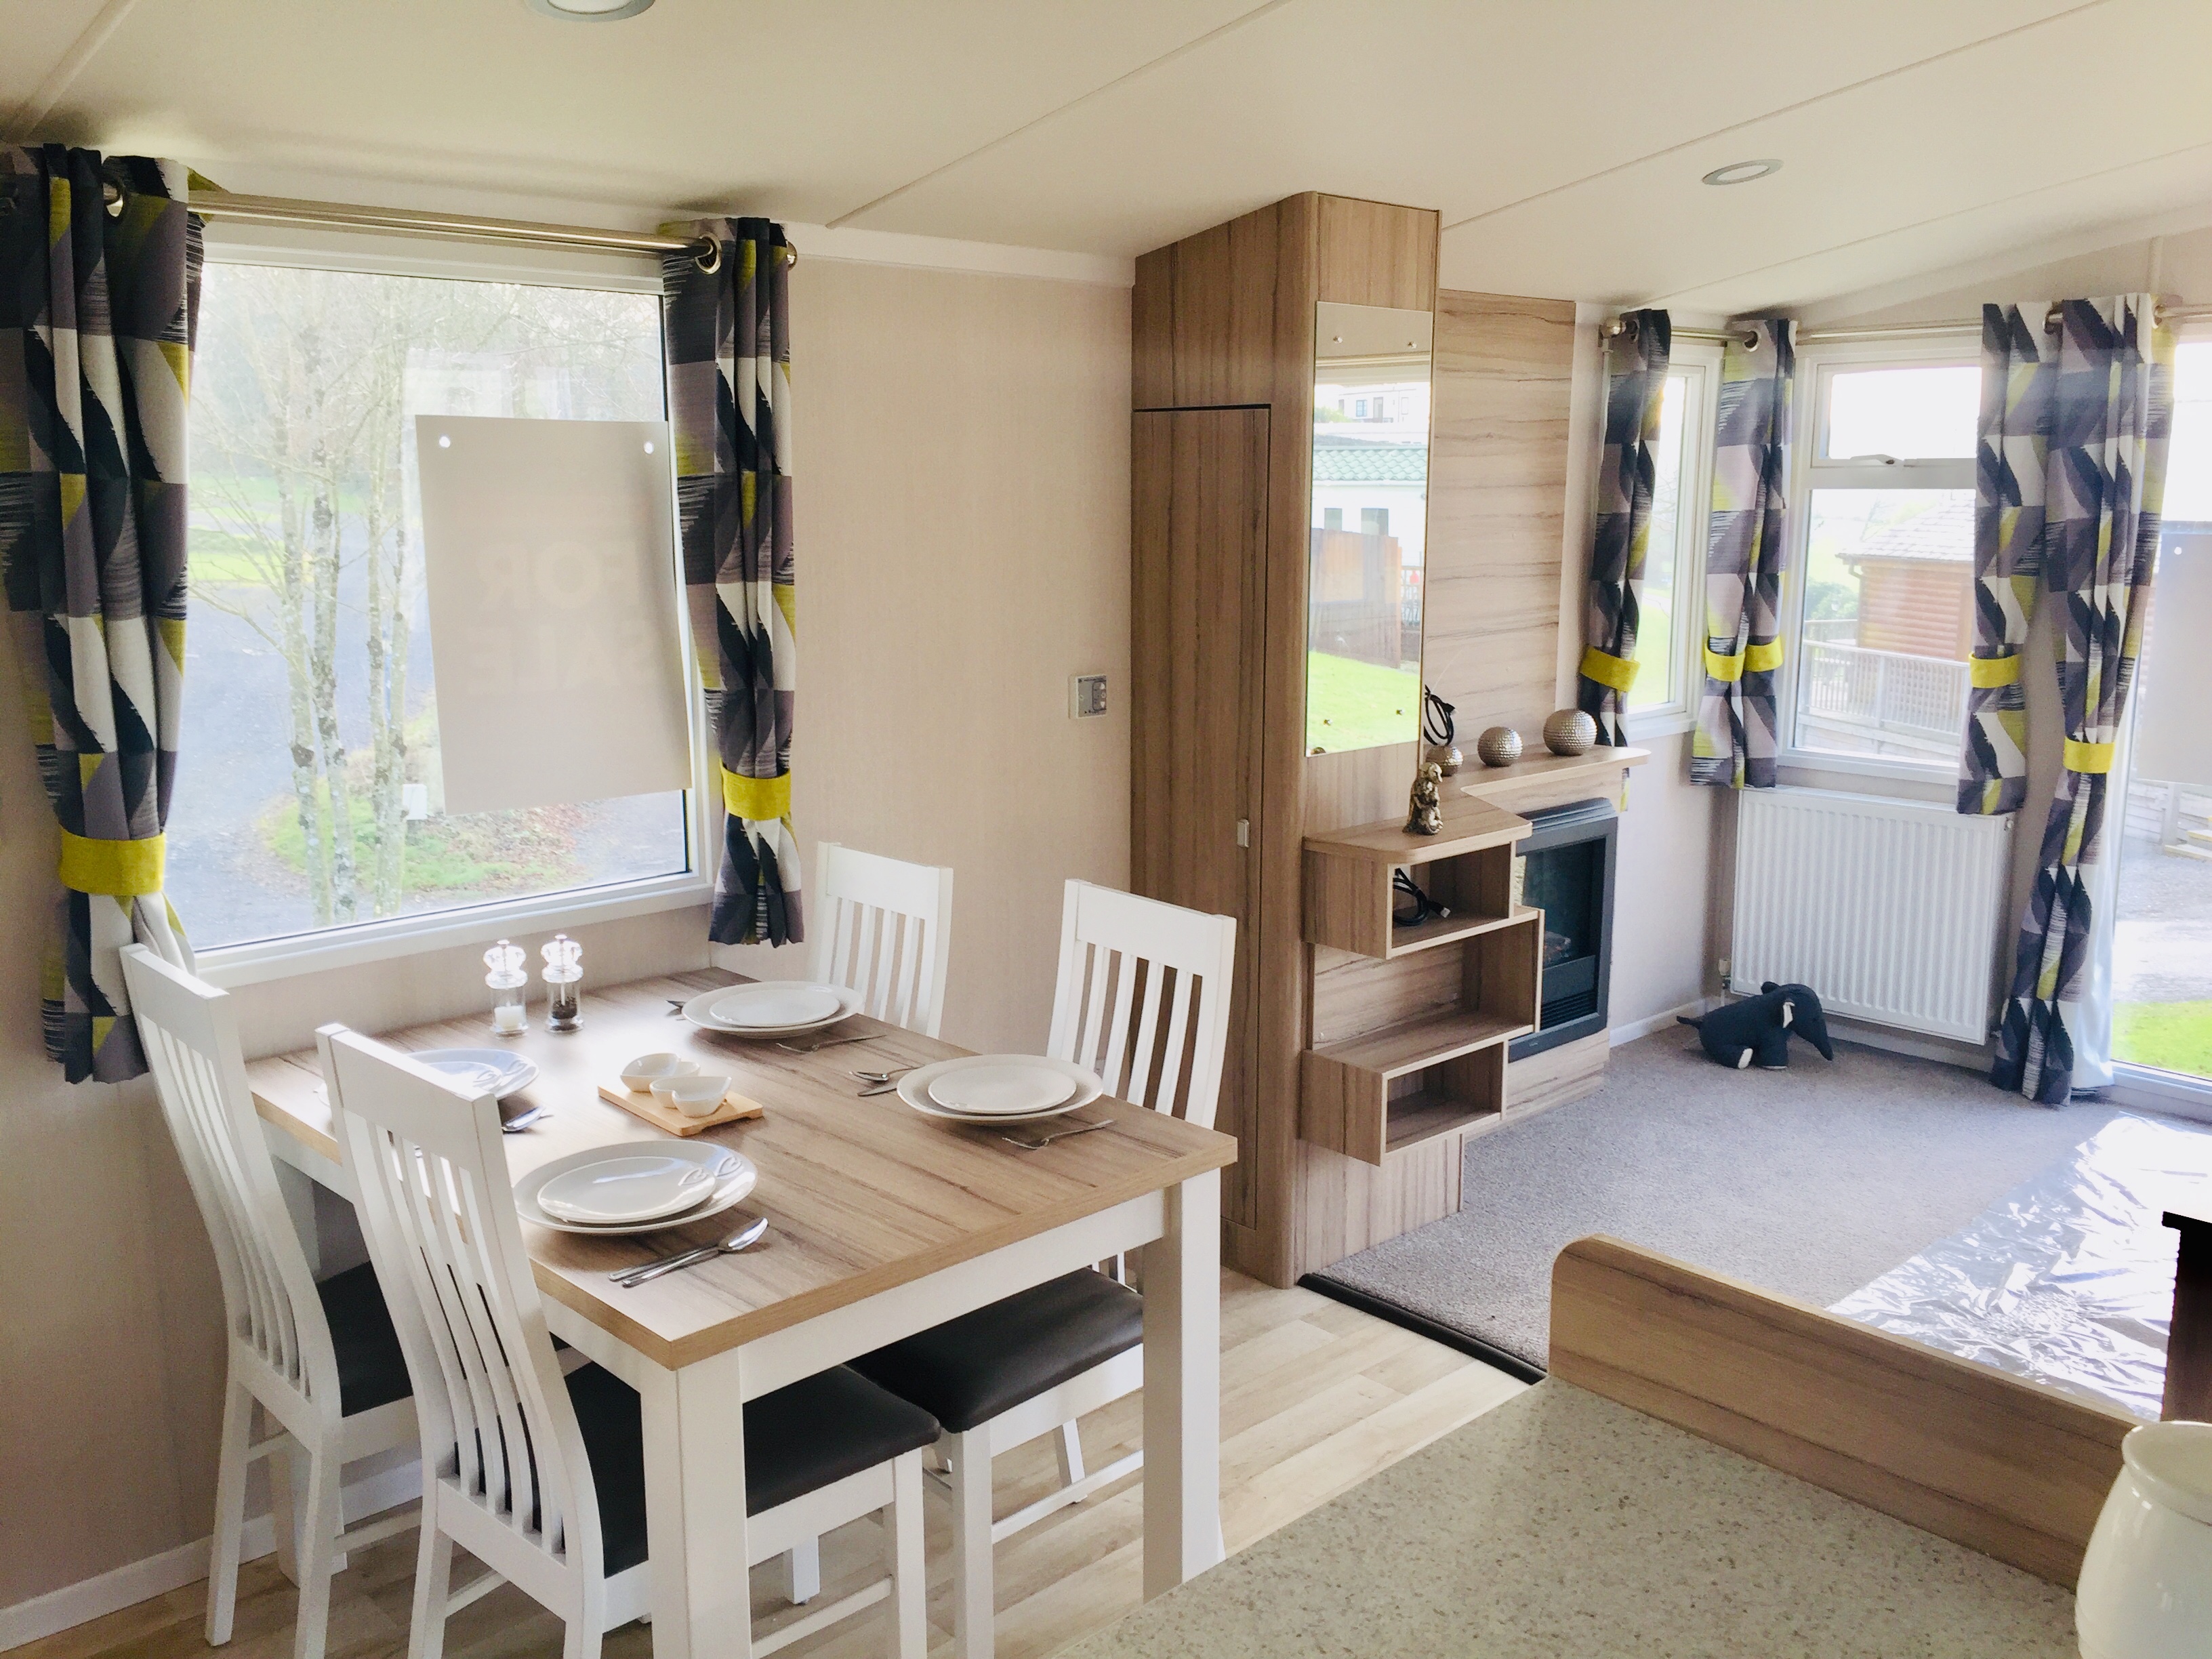 The new Swift Ardennes is ready to view at Smytham Holiday Park, North Devon.